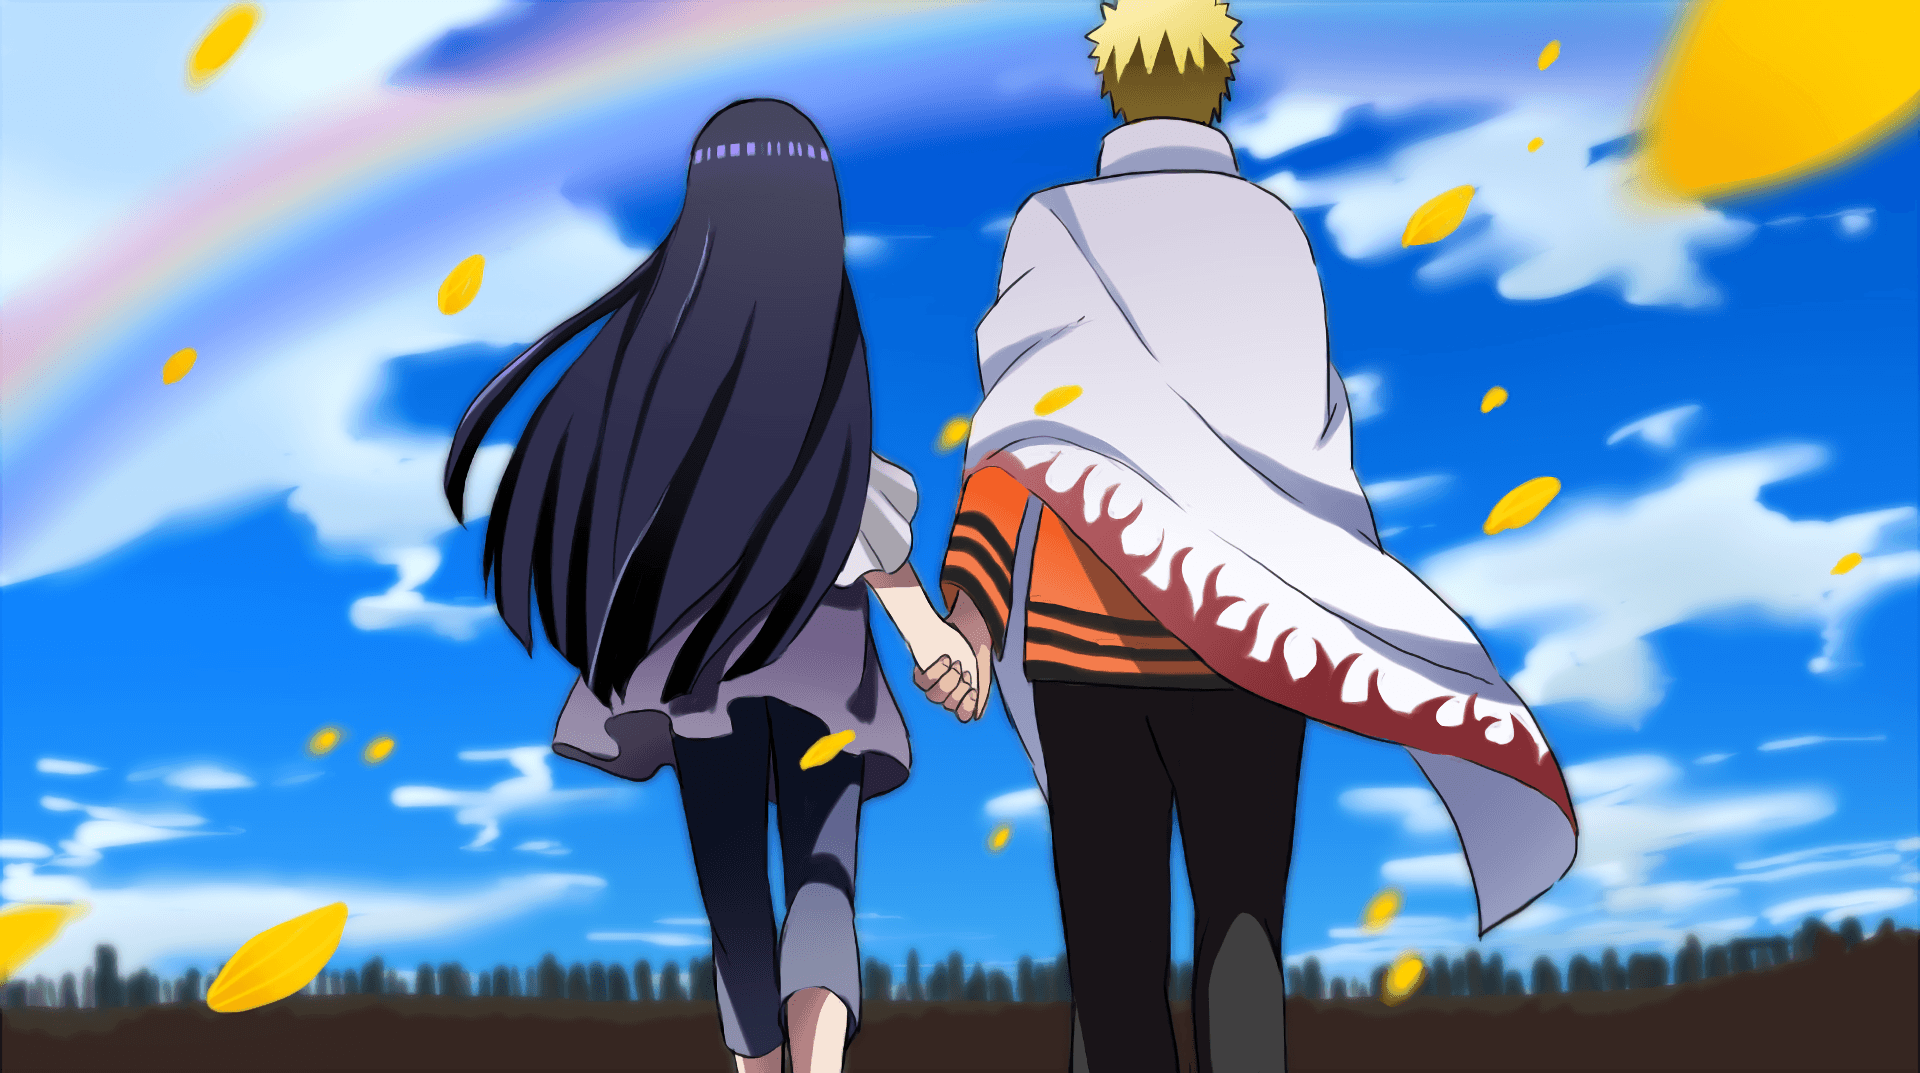 You can also upload and share your favorite hinata e naruto wallpapers. 